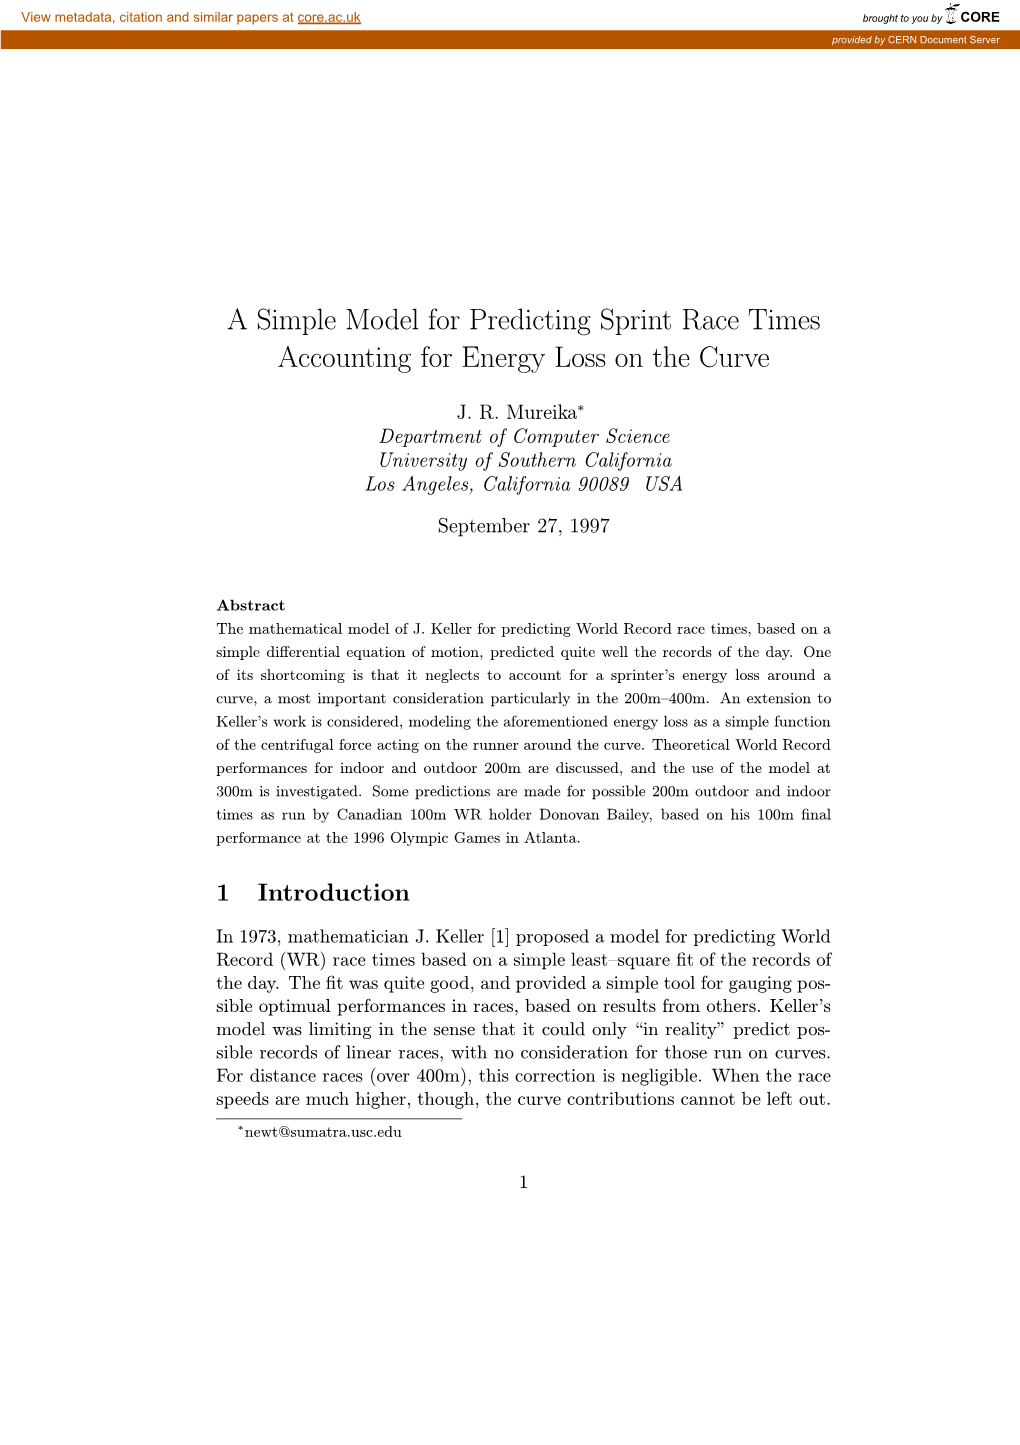 A Simple Model for Predicting Sprint Race Times Accounting for Energy Loss on the Curve